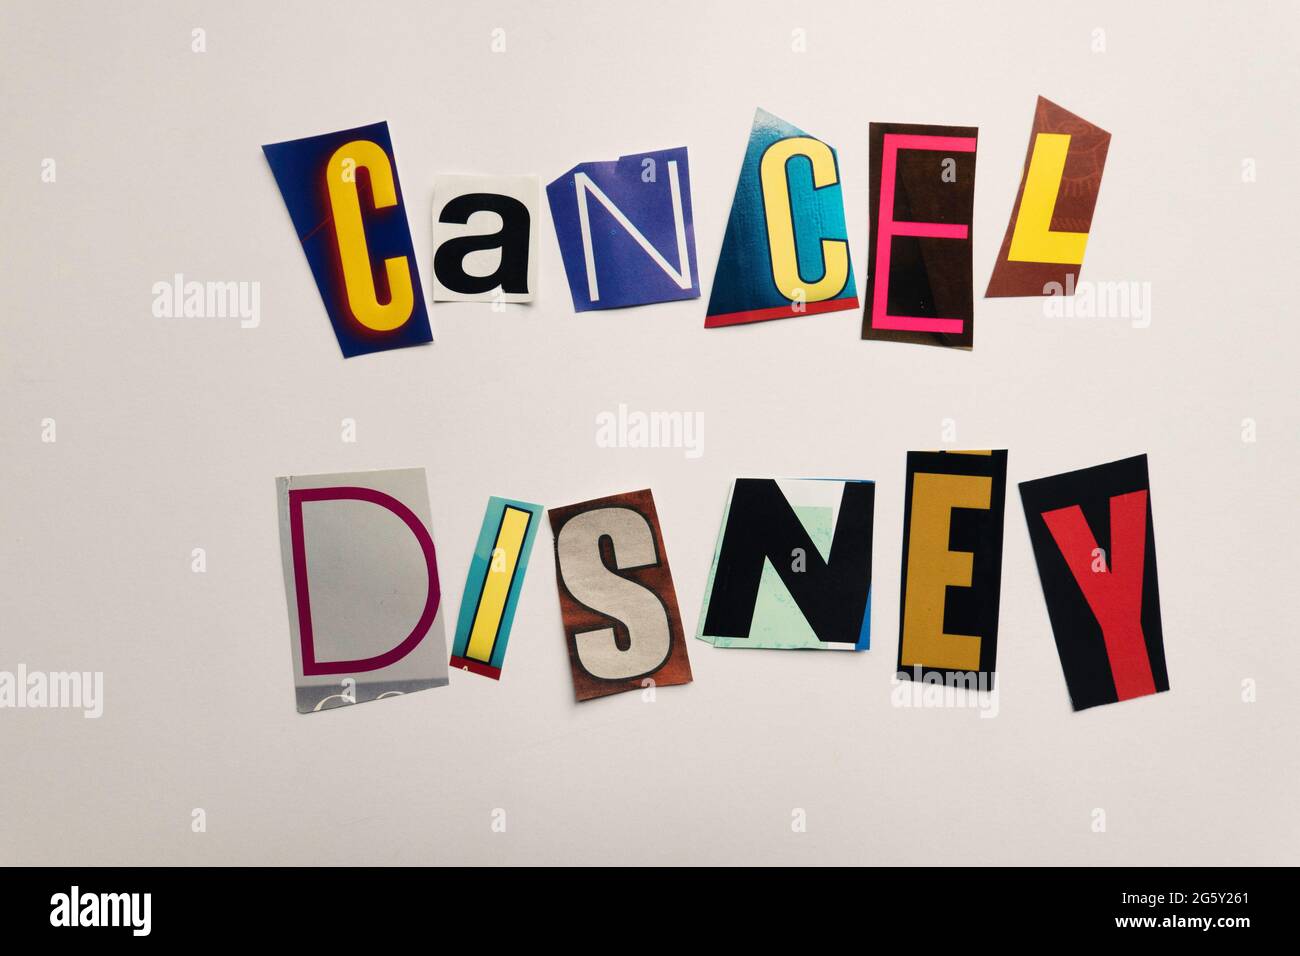 The words 'Cancel Disney' using cut-out paper letters in the ransom note effect typography, USA Stock Photo